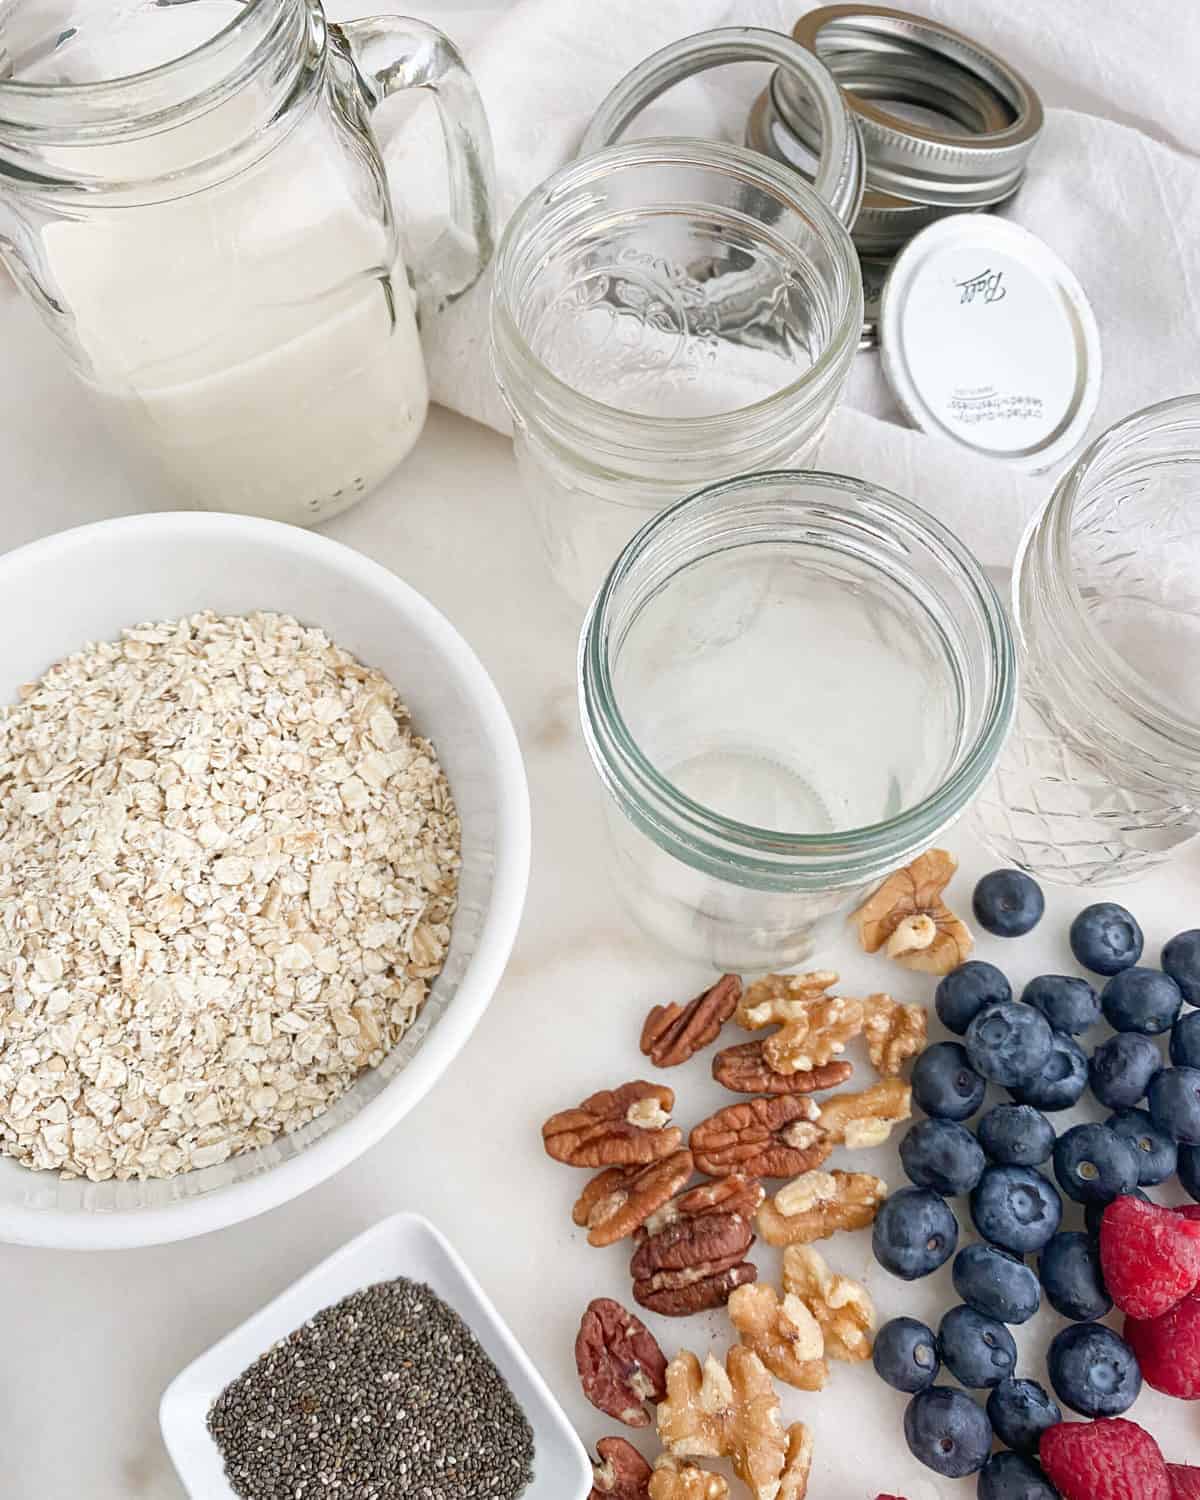 ingredients of overnight oats against a white surface